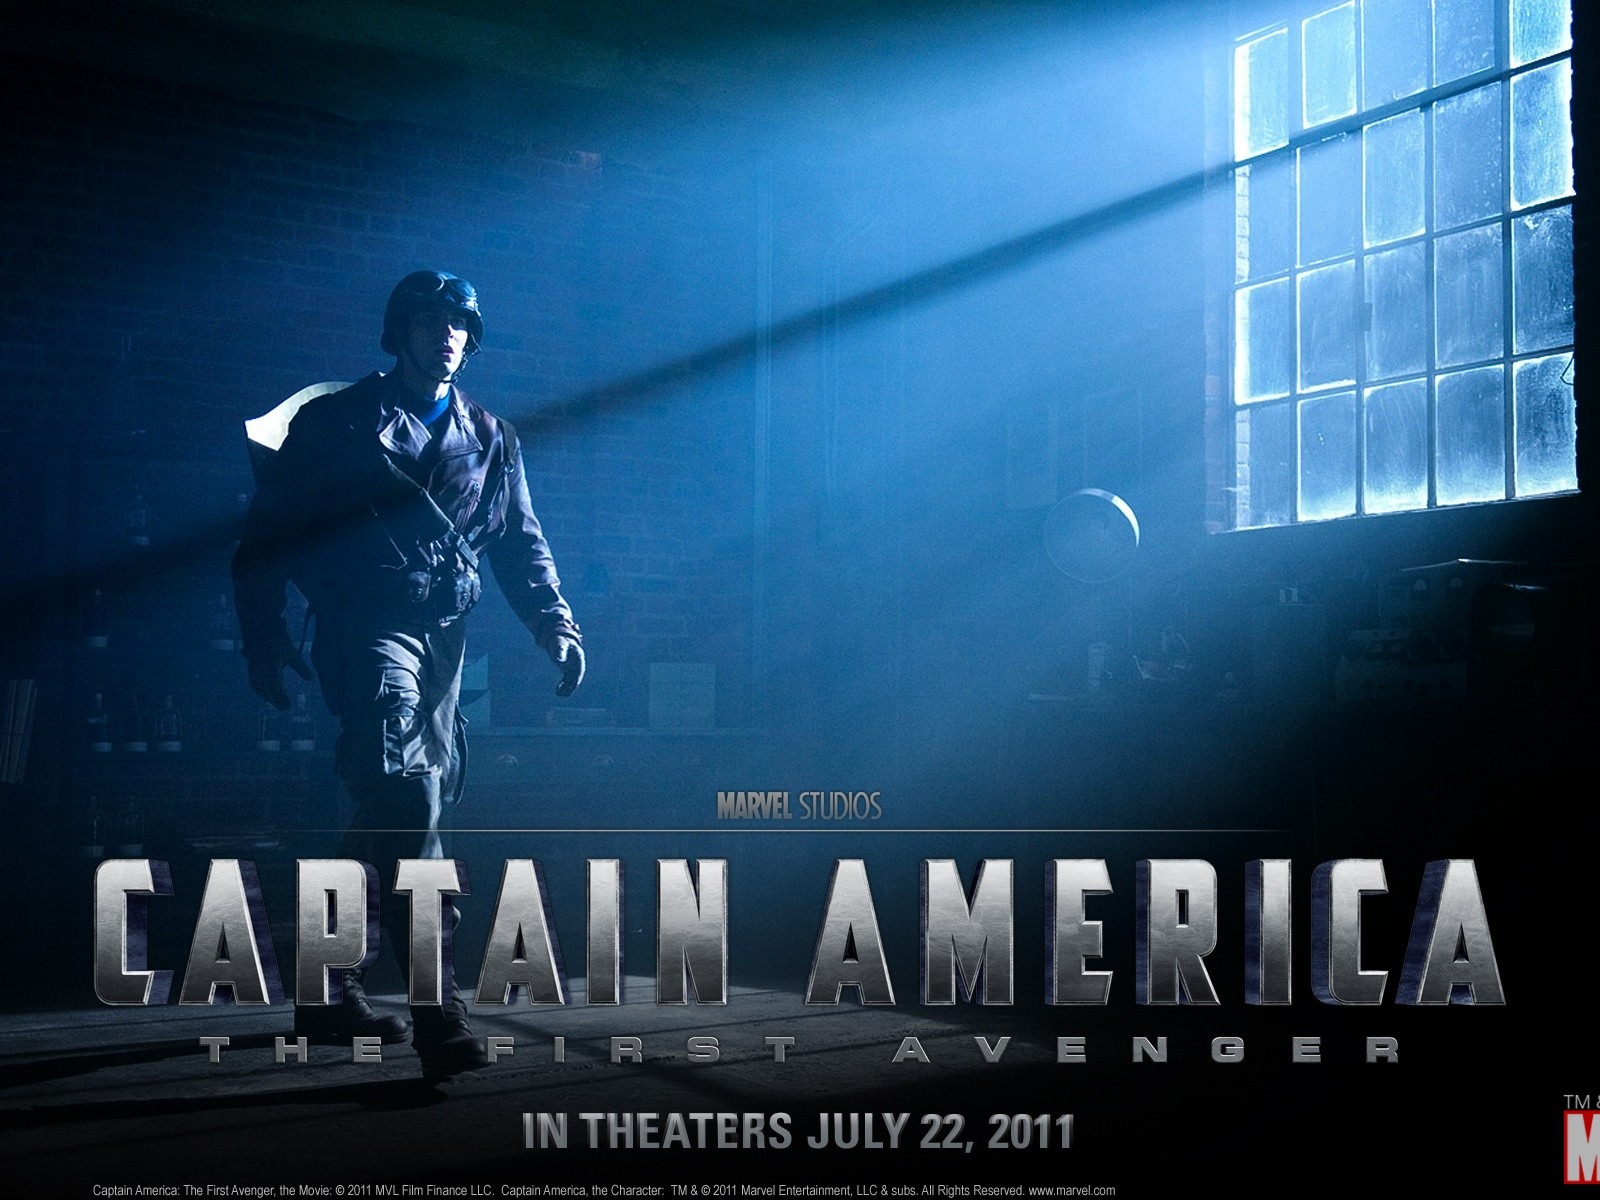 Captain America: The First Avenger wallpapers HD #17 - 1600x1200